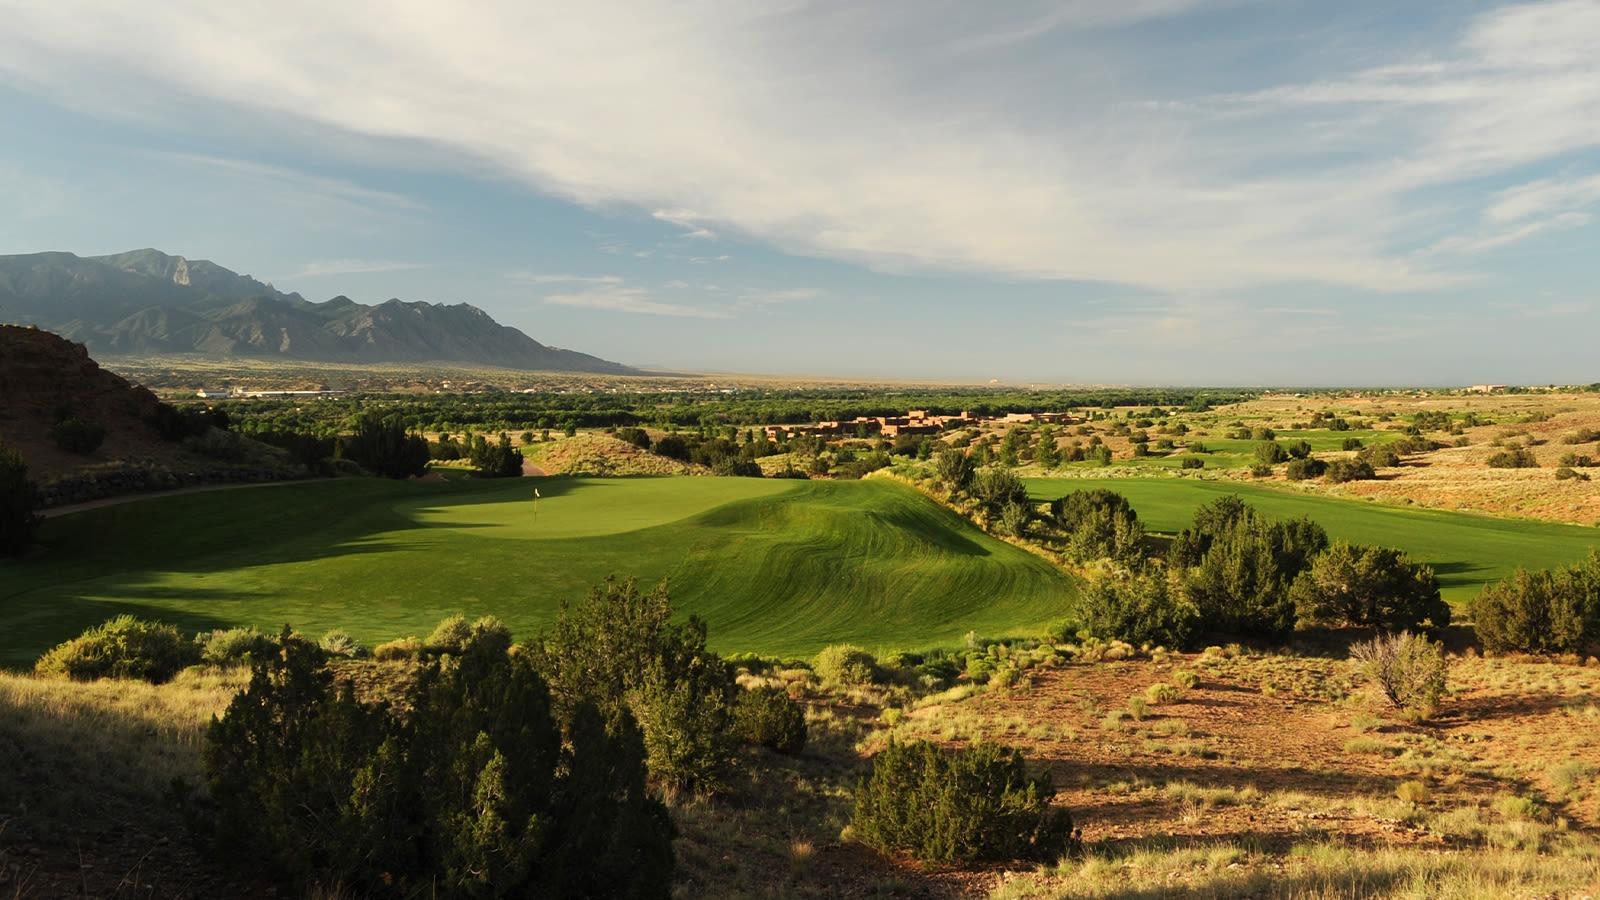 NM State to Compete in NB3 Matchplay Event on Golf Channel This Fall